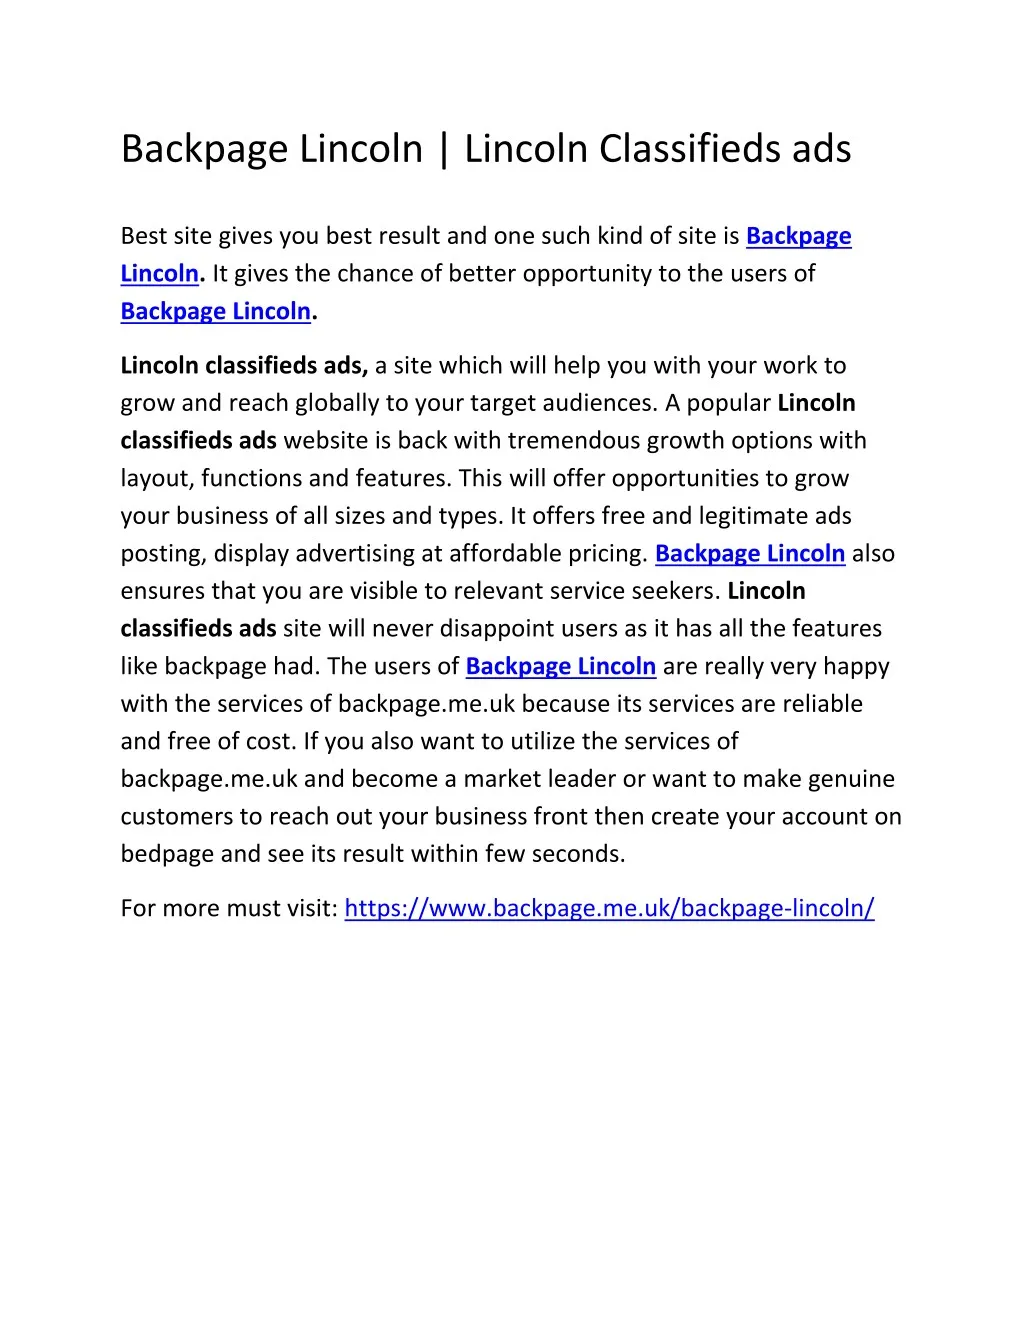 backpage lincoln lincoln classifieds ads